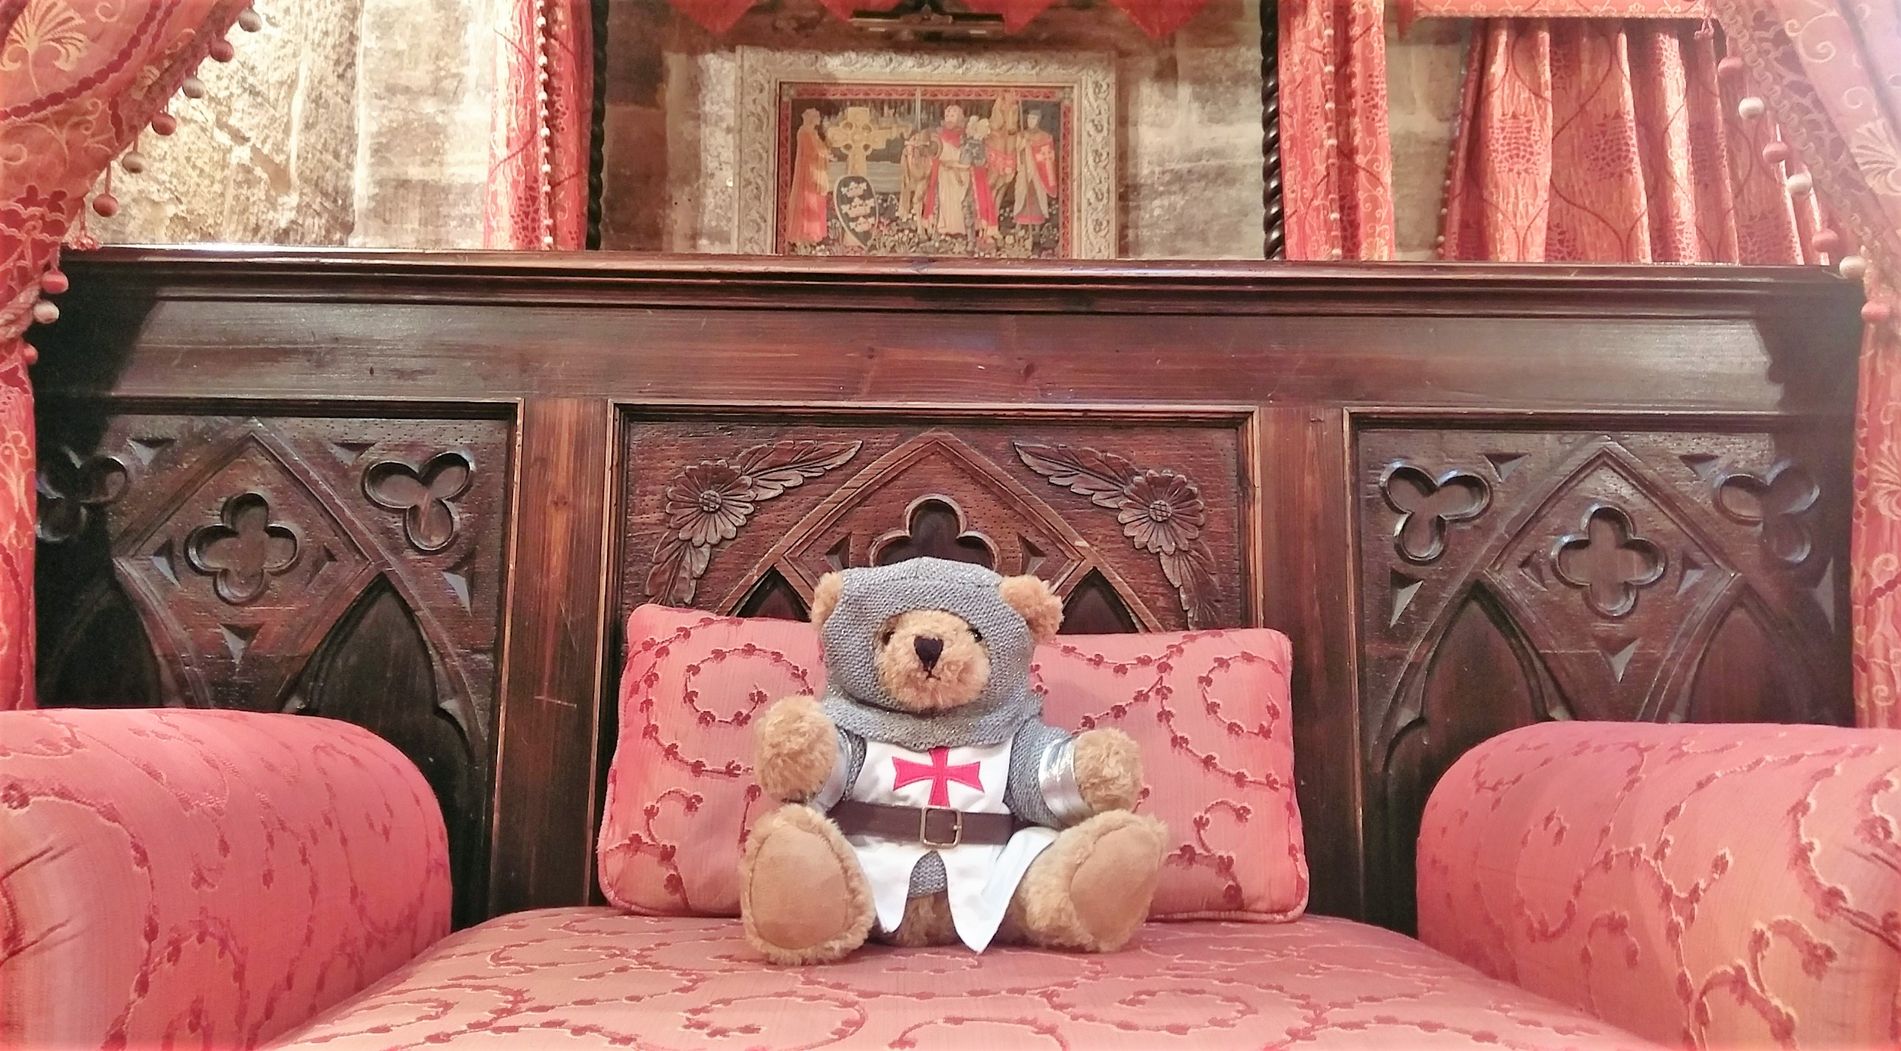 Langley Bear on a bed at Langley Castle Hotel, Northumberland, UK. 